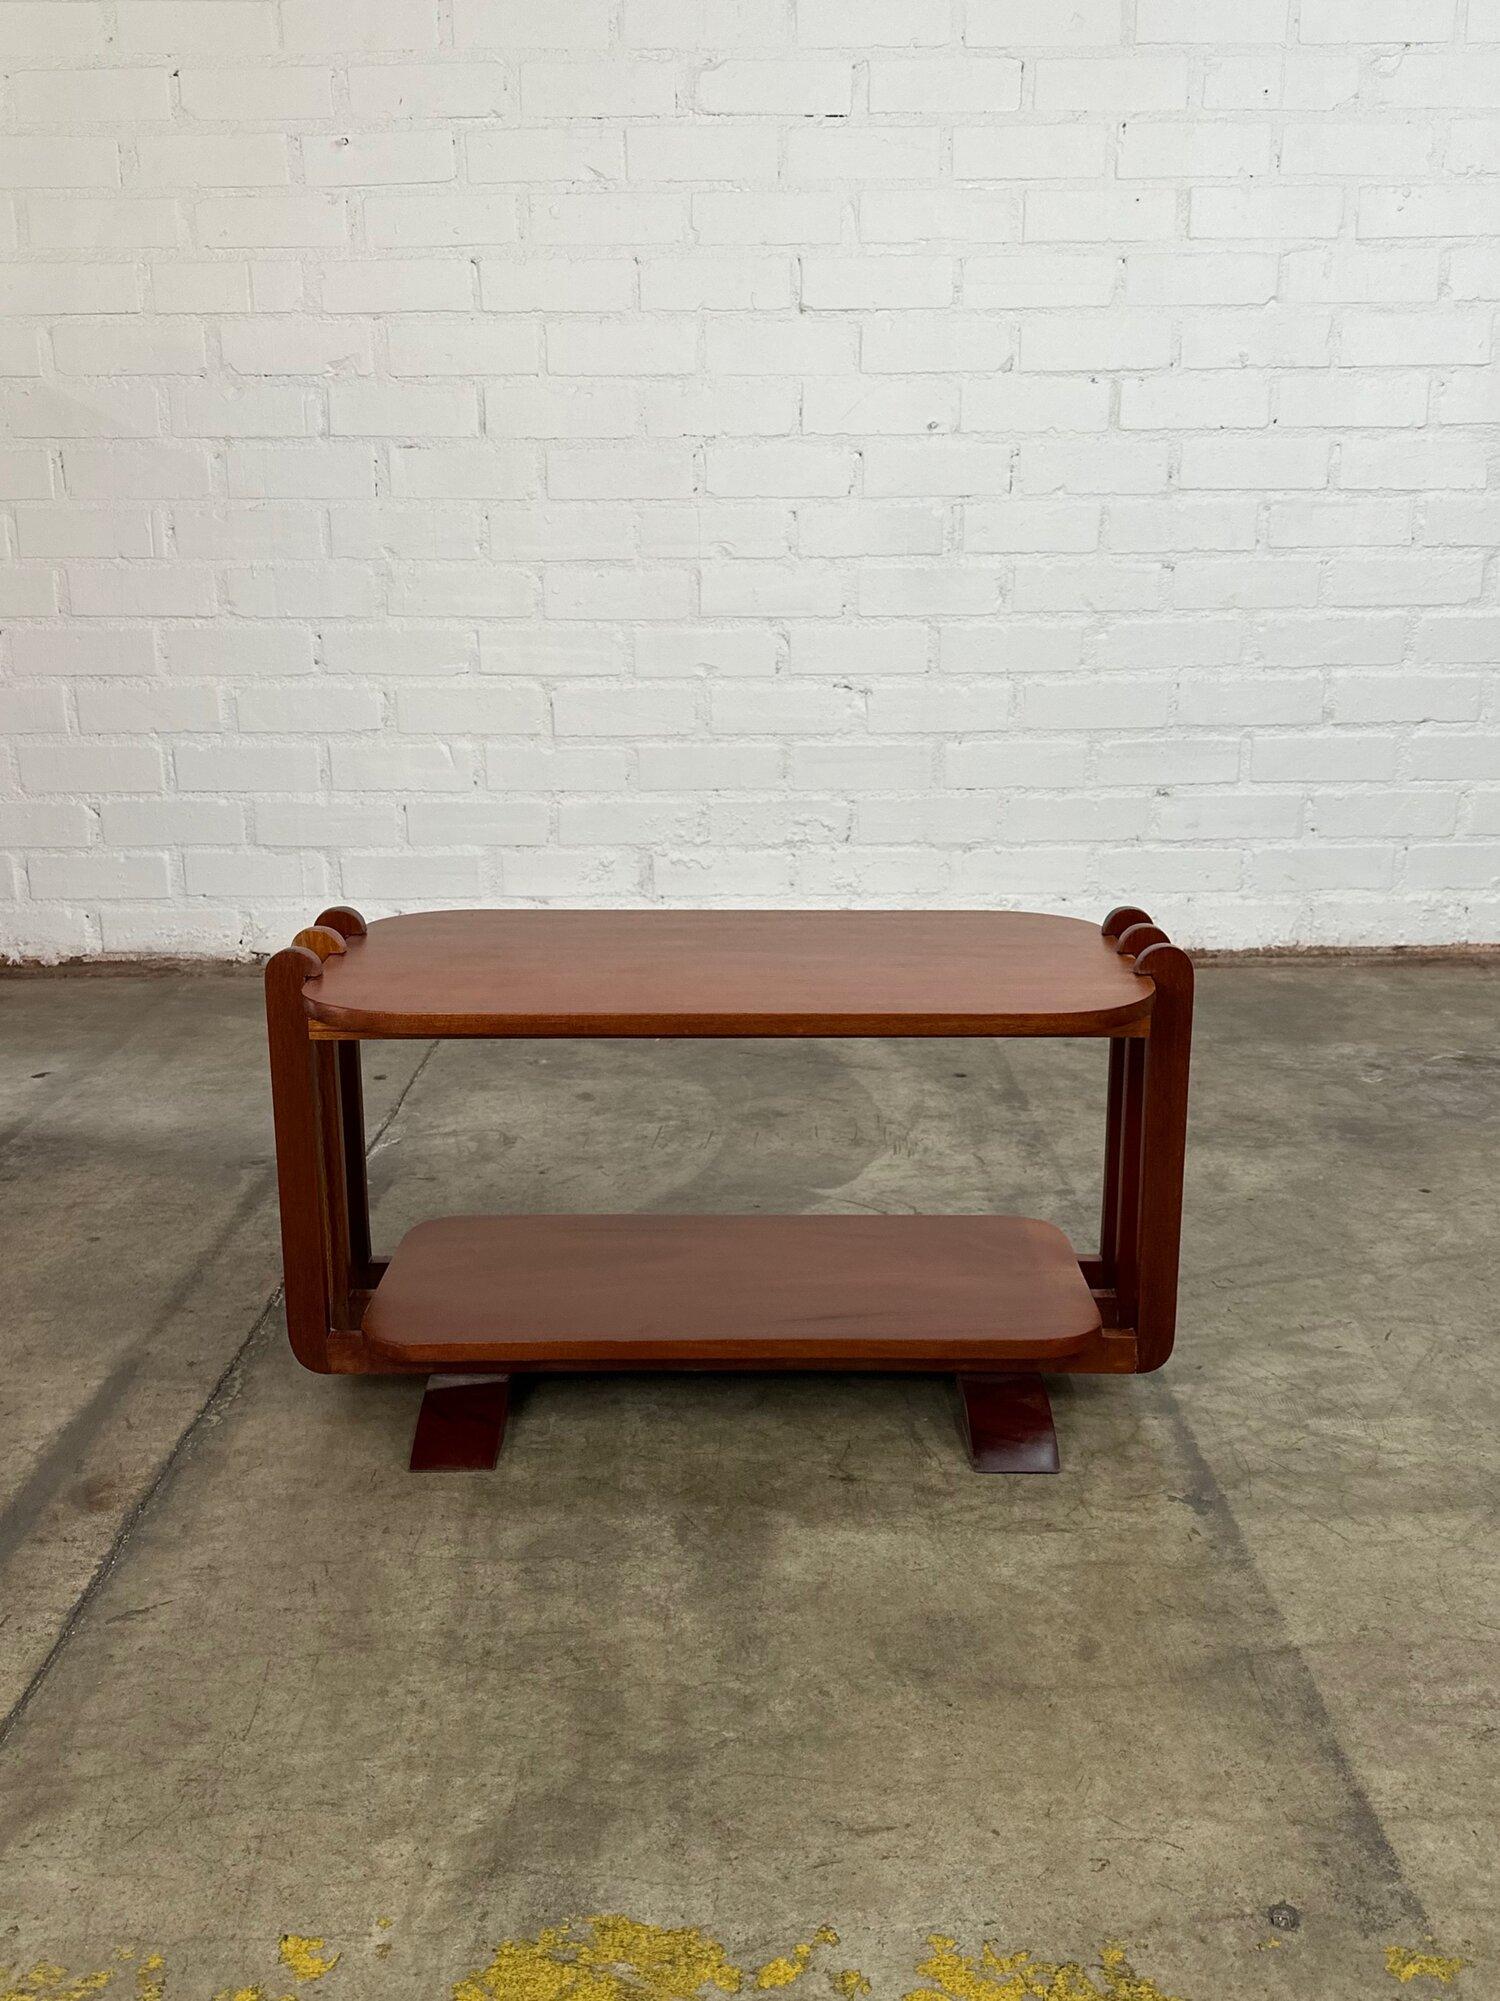 W33 D12 H16.5

Fully restored low solid mahogany side table. Item sound and sturdy. Item has been clear coated and show natural hue variations in grain.